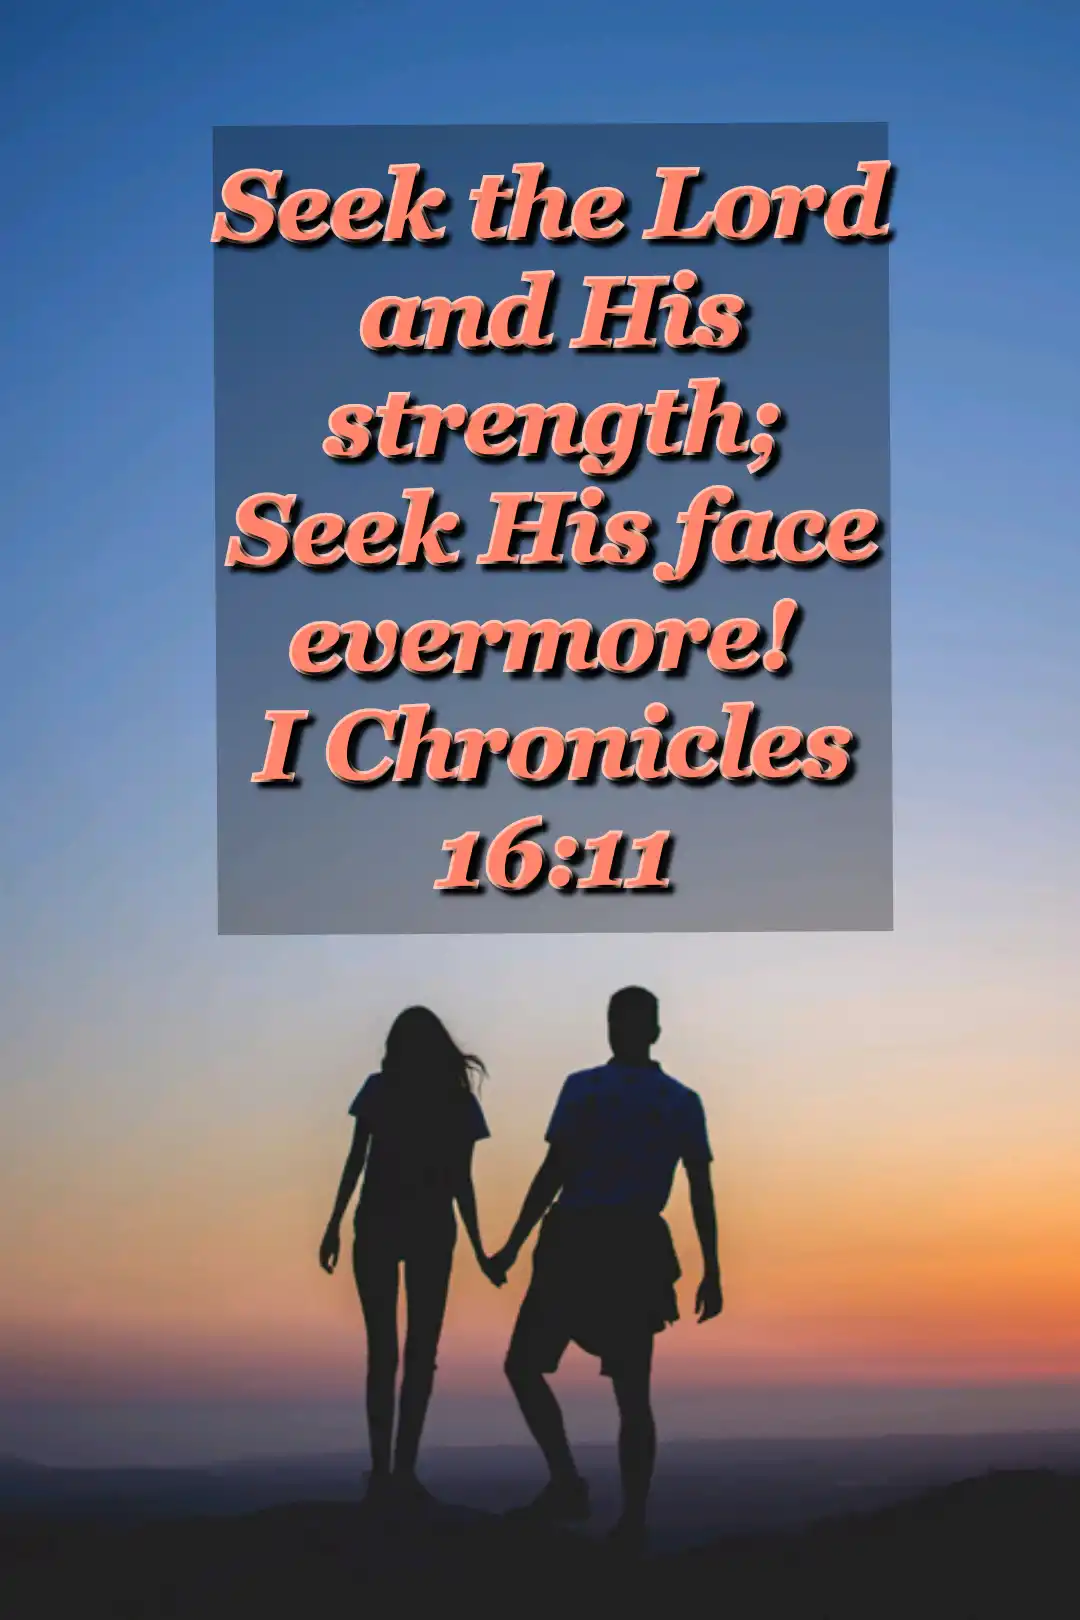 Bible-Verses-about-Weakness (1 Chronicles 16:11)